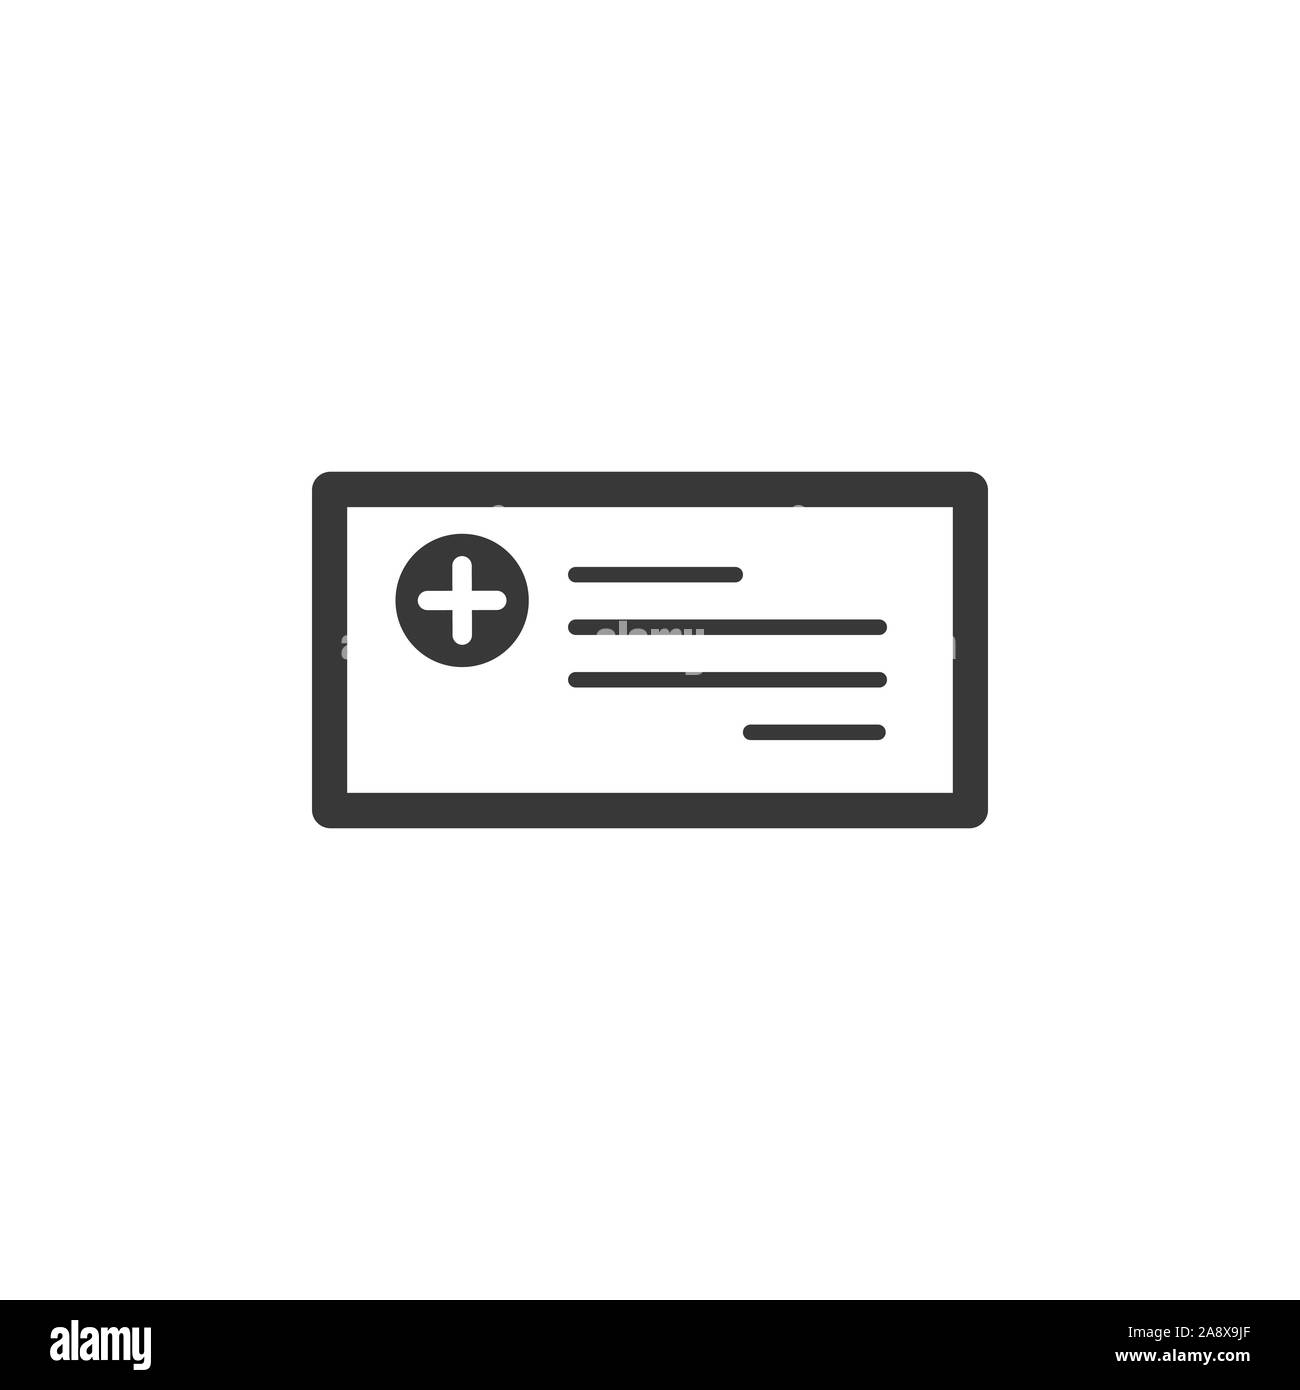 Prescription icon. Isolated image. Flat pharmacy and medicine vector illustration Stock Vector